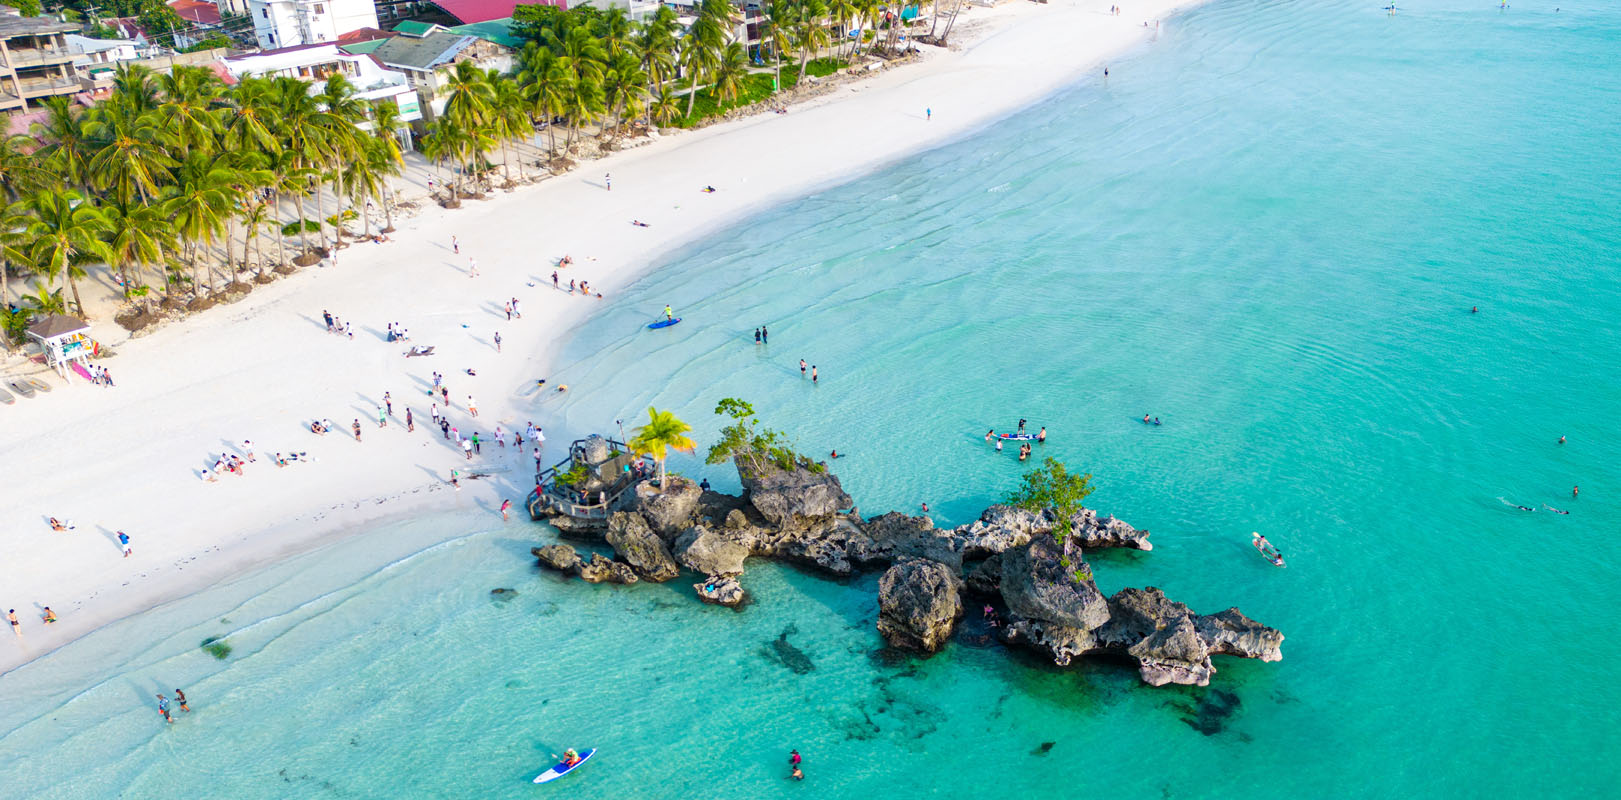 Best places to visit in Visayas - Boracay